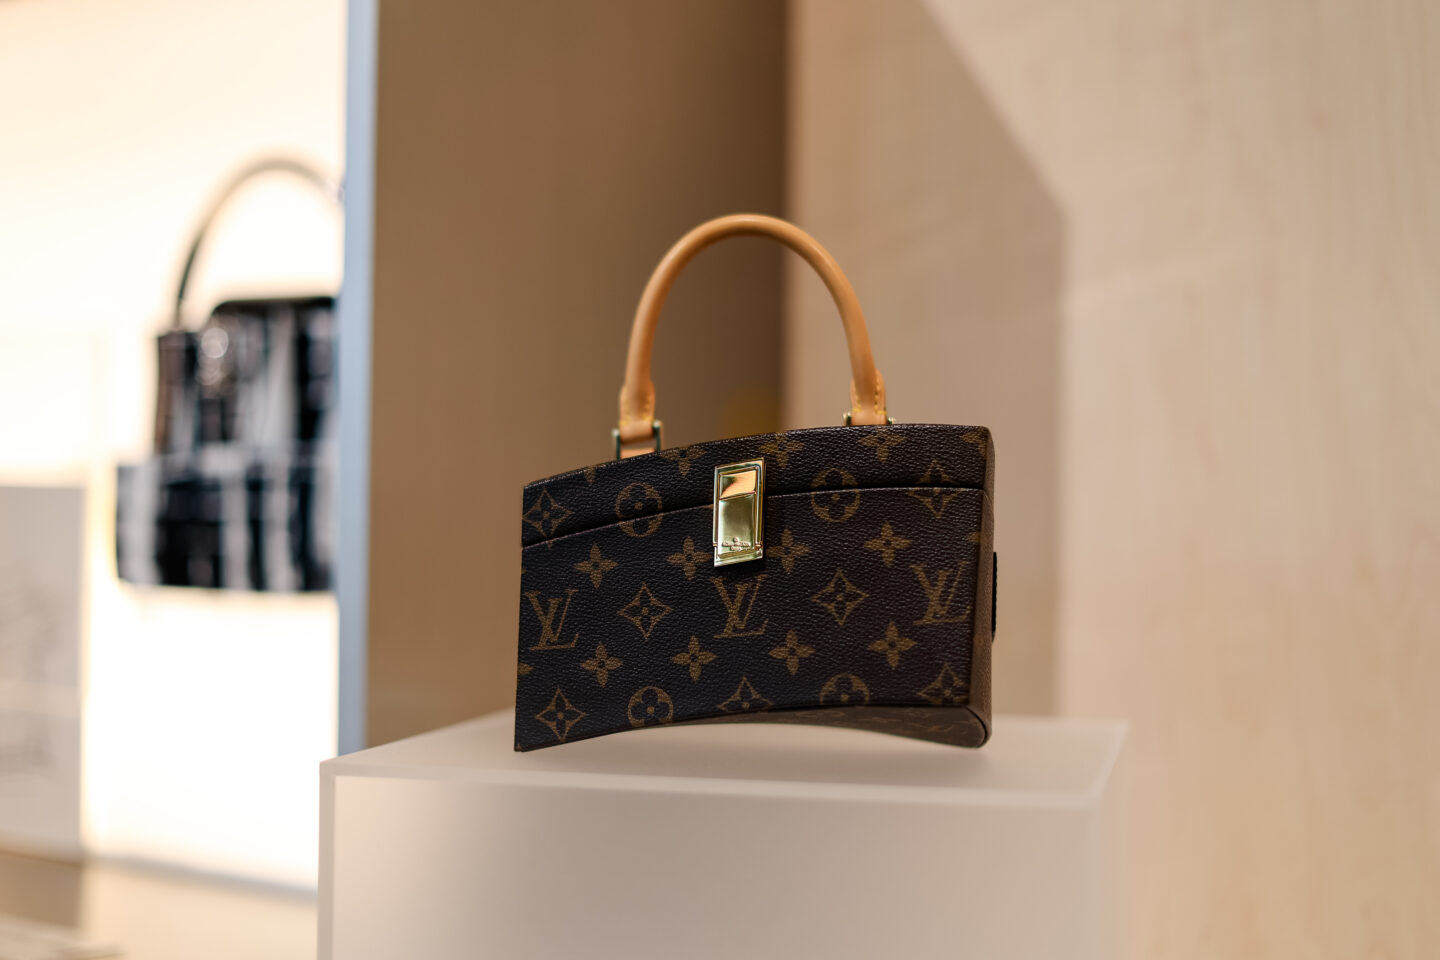 Louis Vuitton celebrated Frank Gehry at Art Basel Miami - HIGHXTAR.